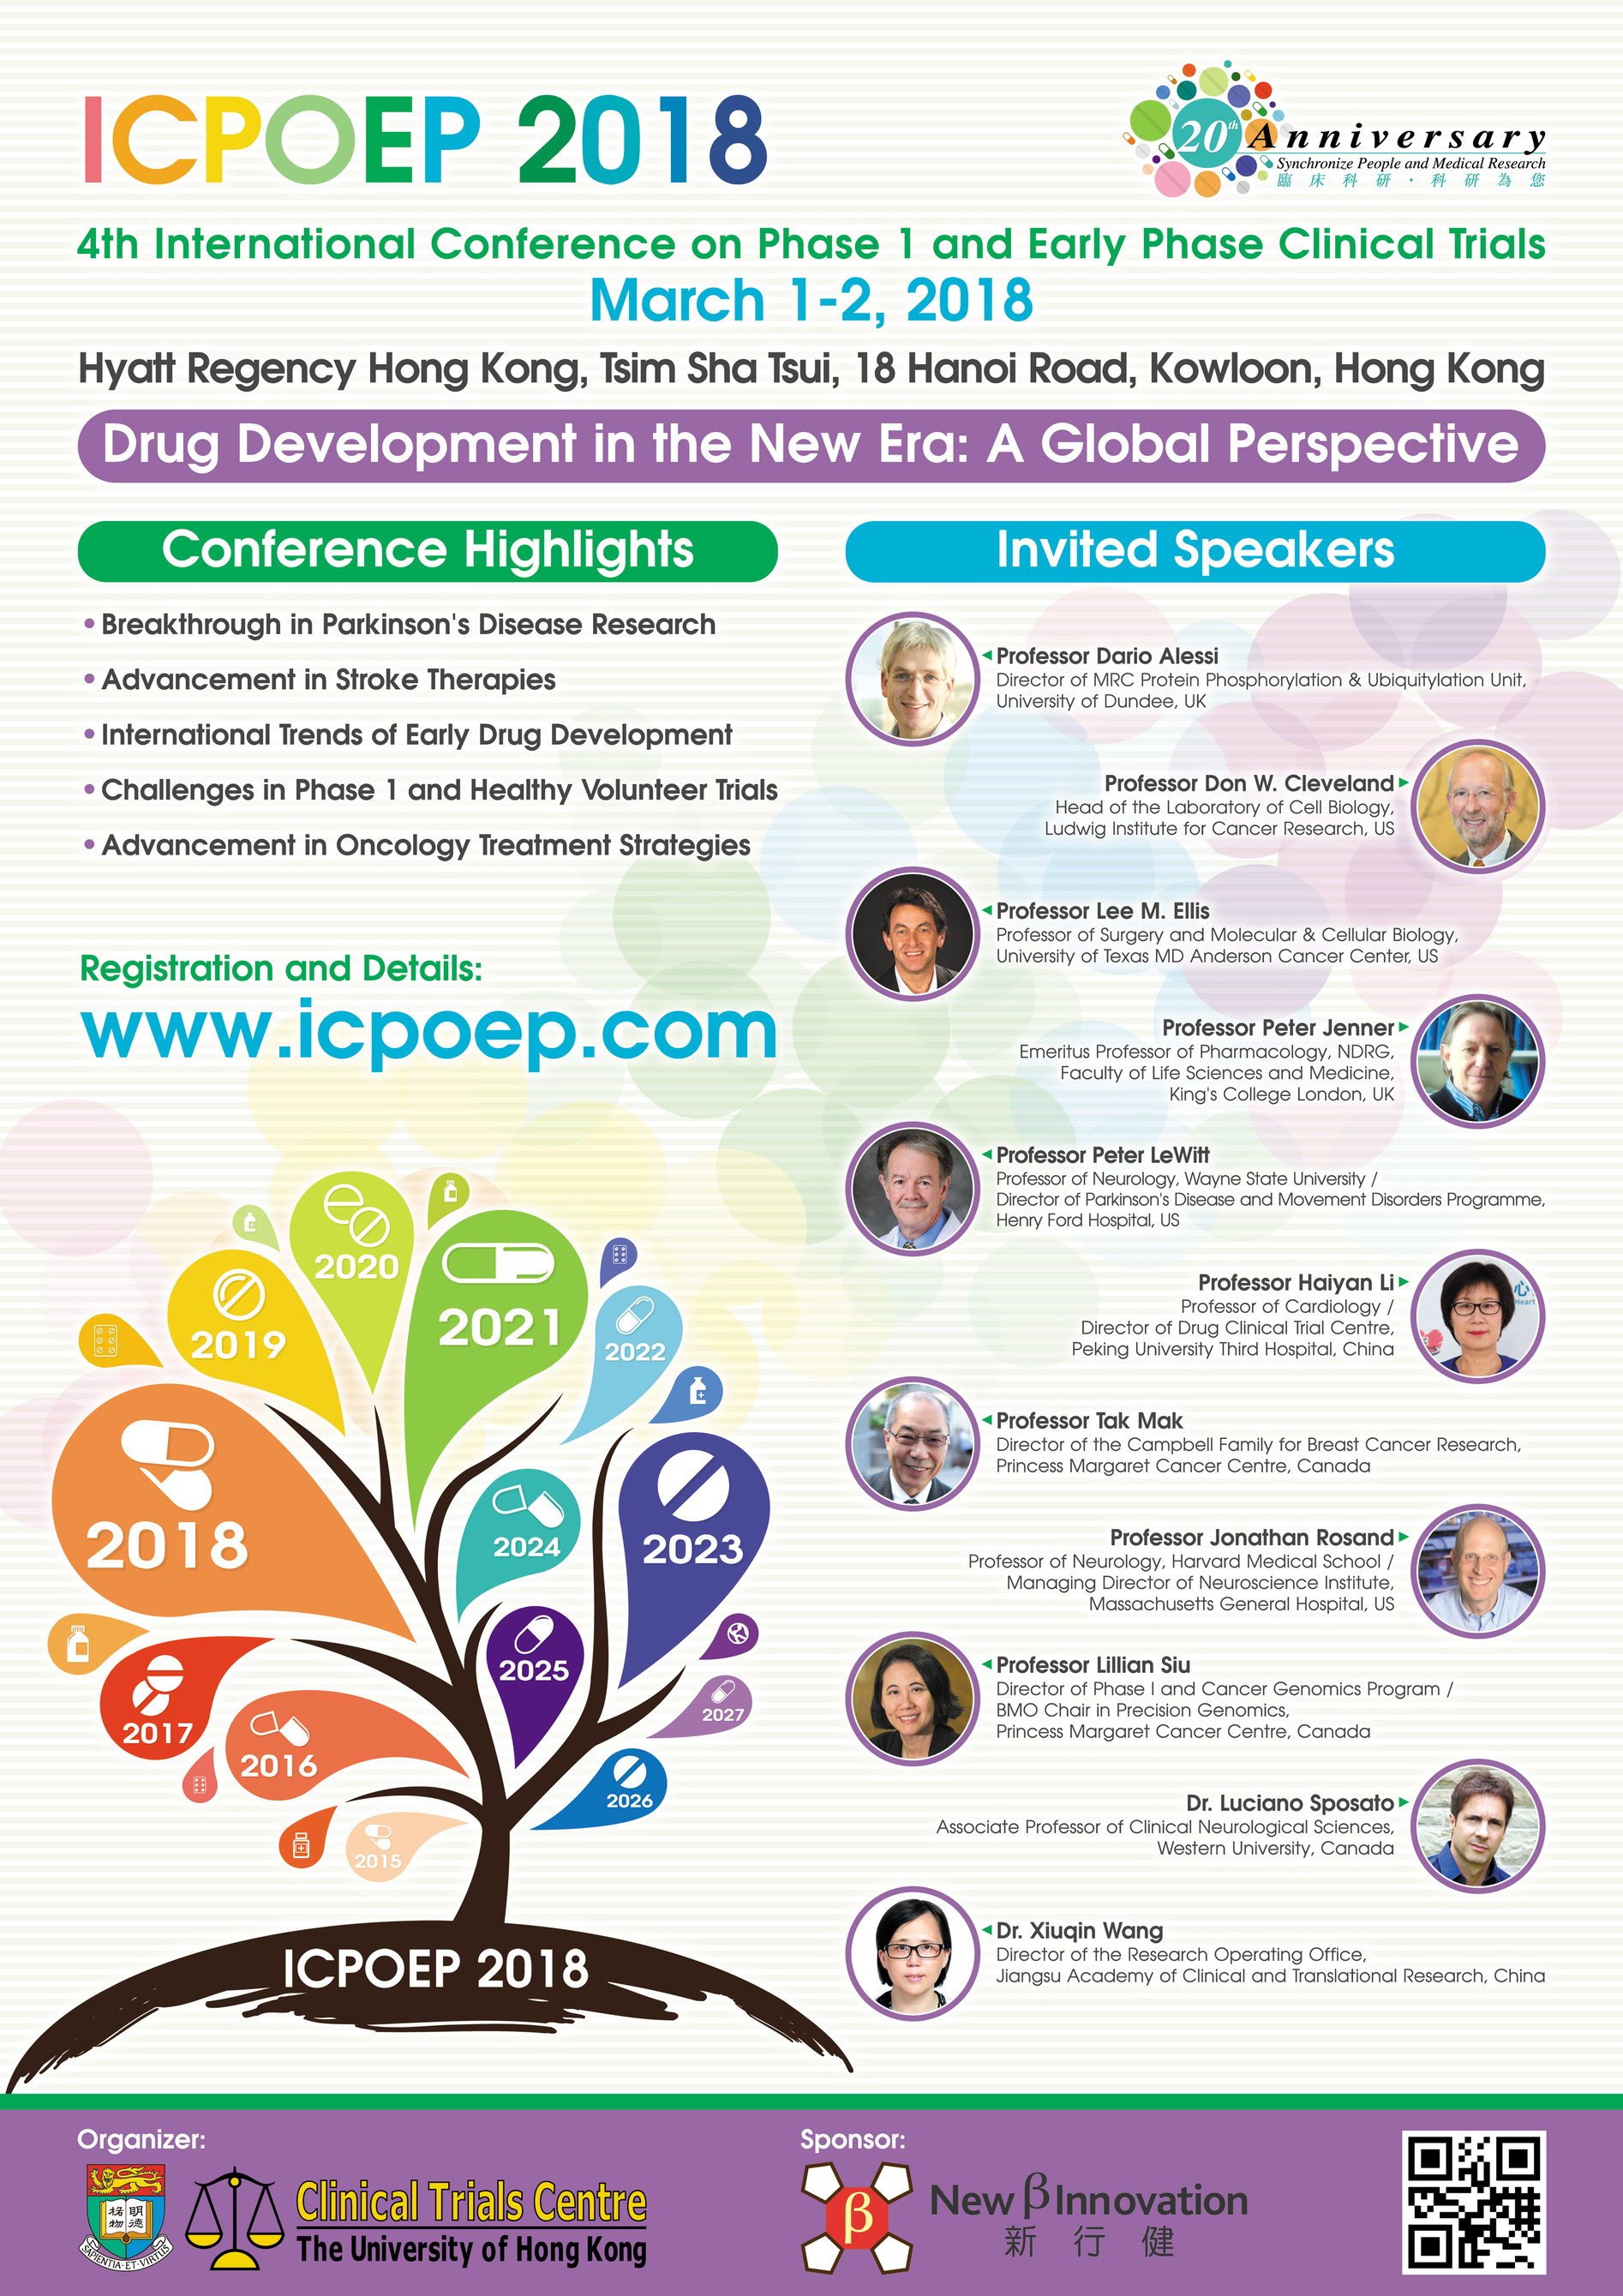 A flagship event of HKU Clinical Trials Centre - ICPOEP2018